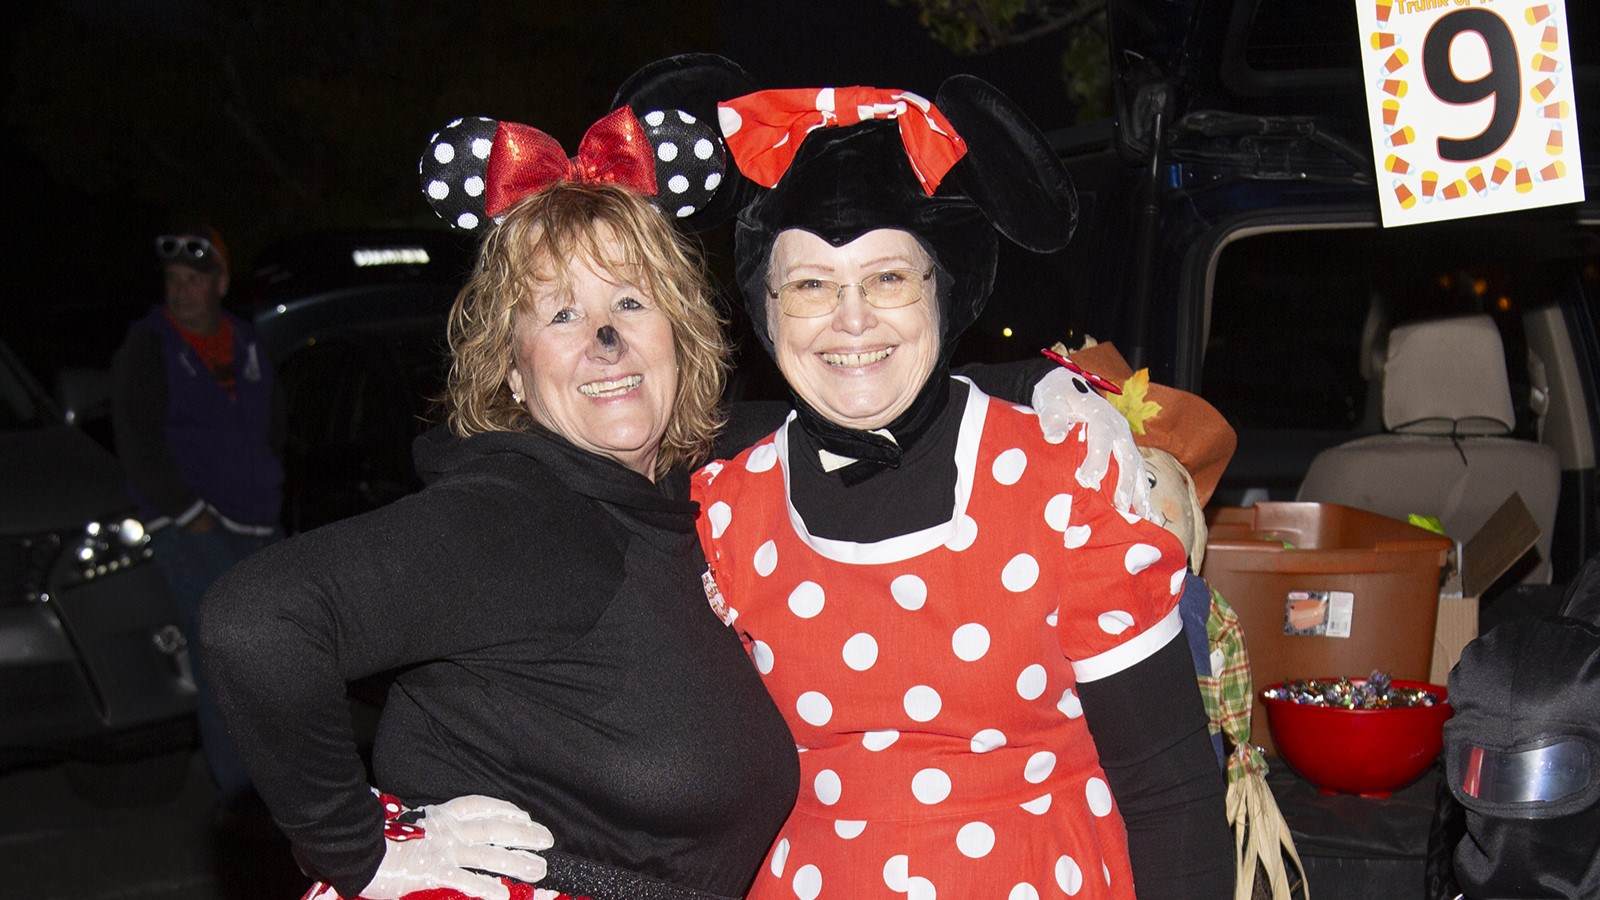 Two women dressed as Minnie Mouse for Halloween.